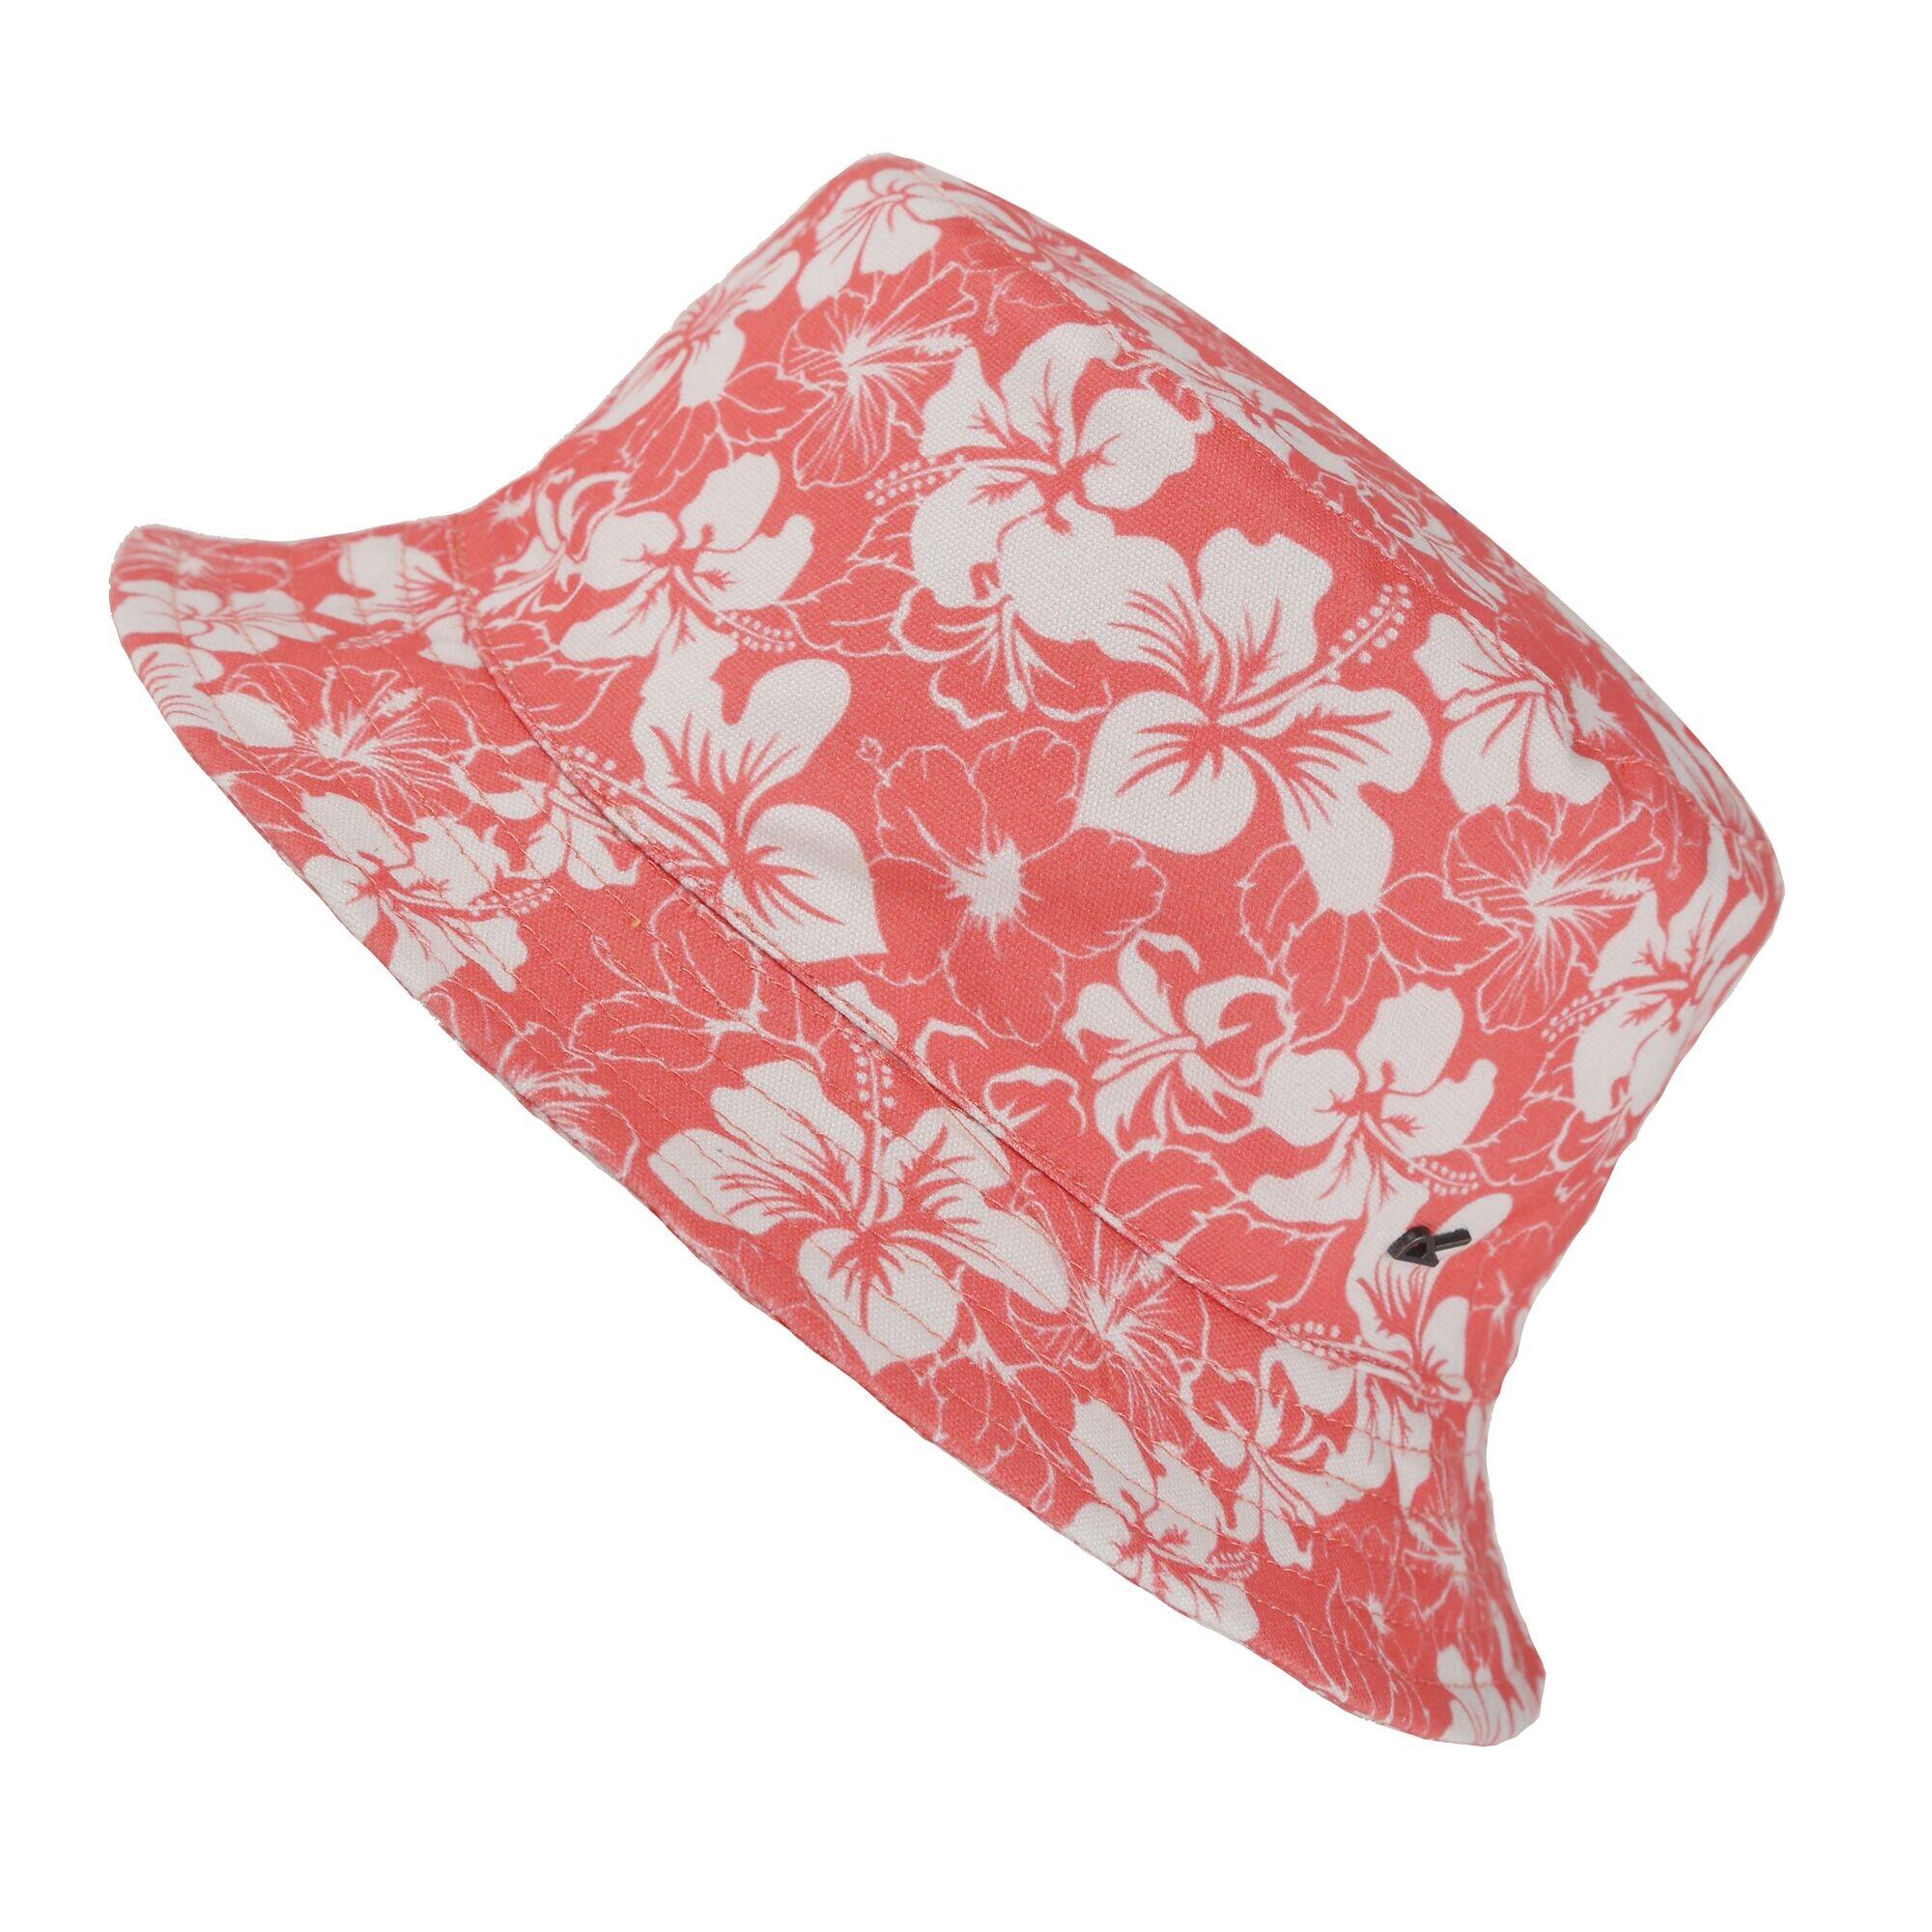 Childrens/Kids Crow Floral Canvas Bucket Hat (Shell Pink) 1/2